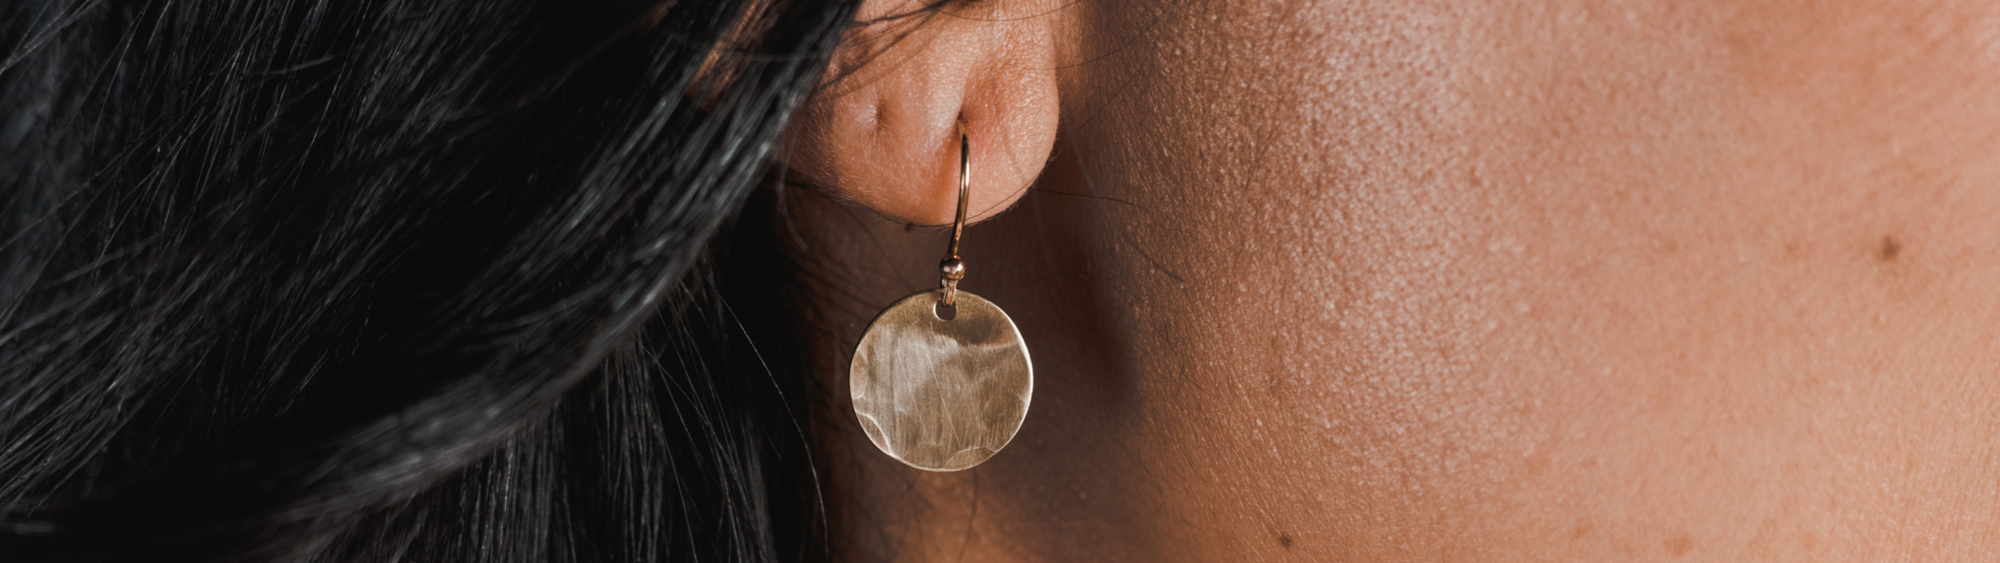 Close-up of a woman's ear wearing a round, metallic earring, with her black hair partially visible.